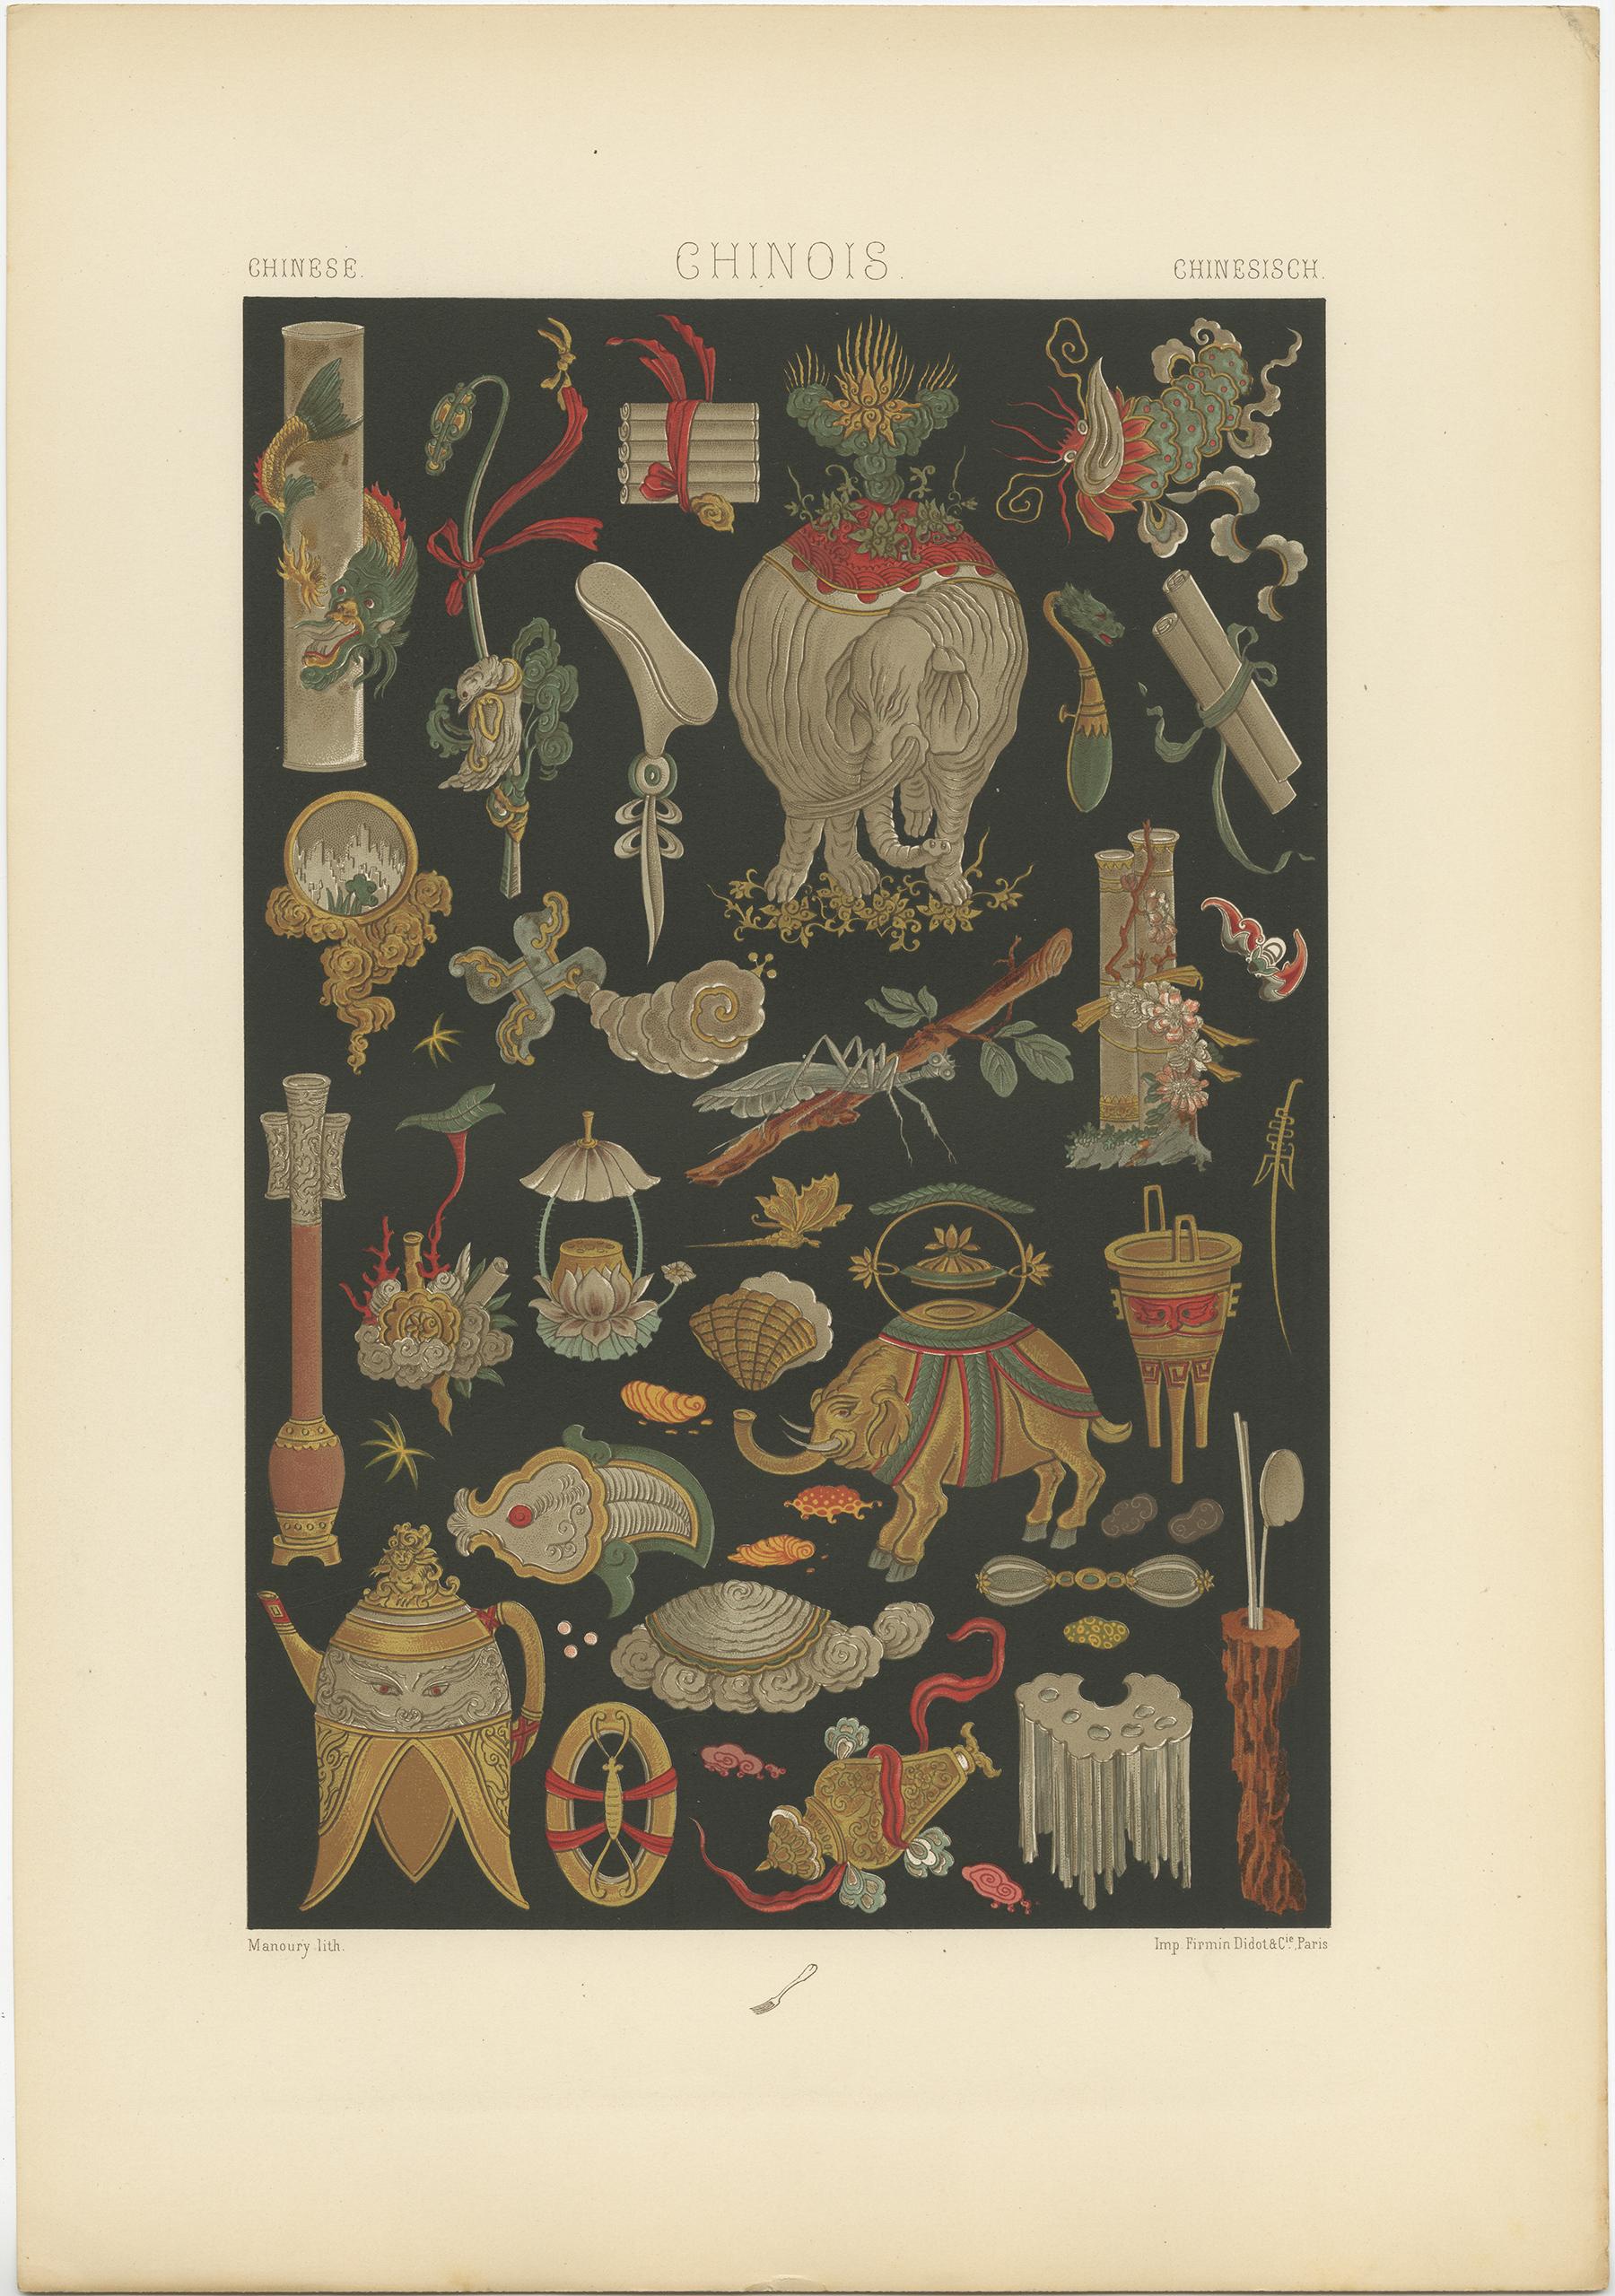 Antique print titled 'Chinese - Chinois - Chinesisch'. Chromolithograph of Chinese painted and gilt motifs from lacquered wood ornaments. This print originates from 'l'Ornement Polychrome' by Auguste Racinet. Published circa 1890.